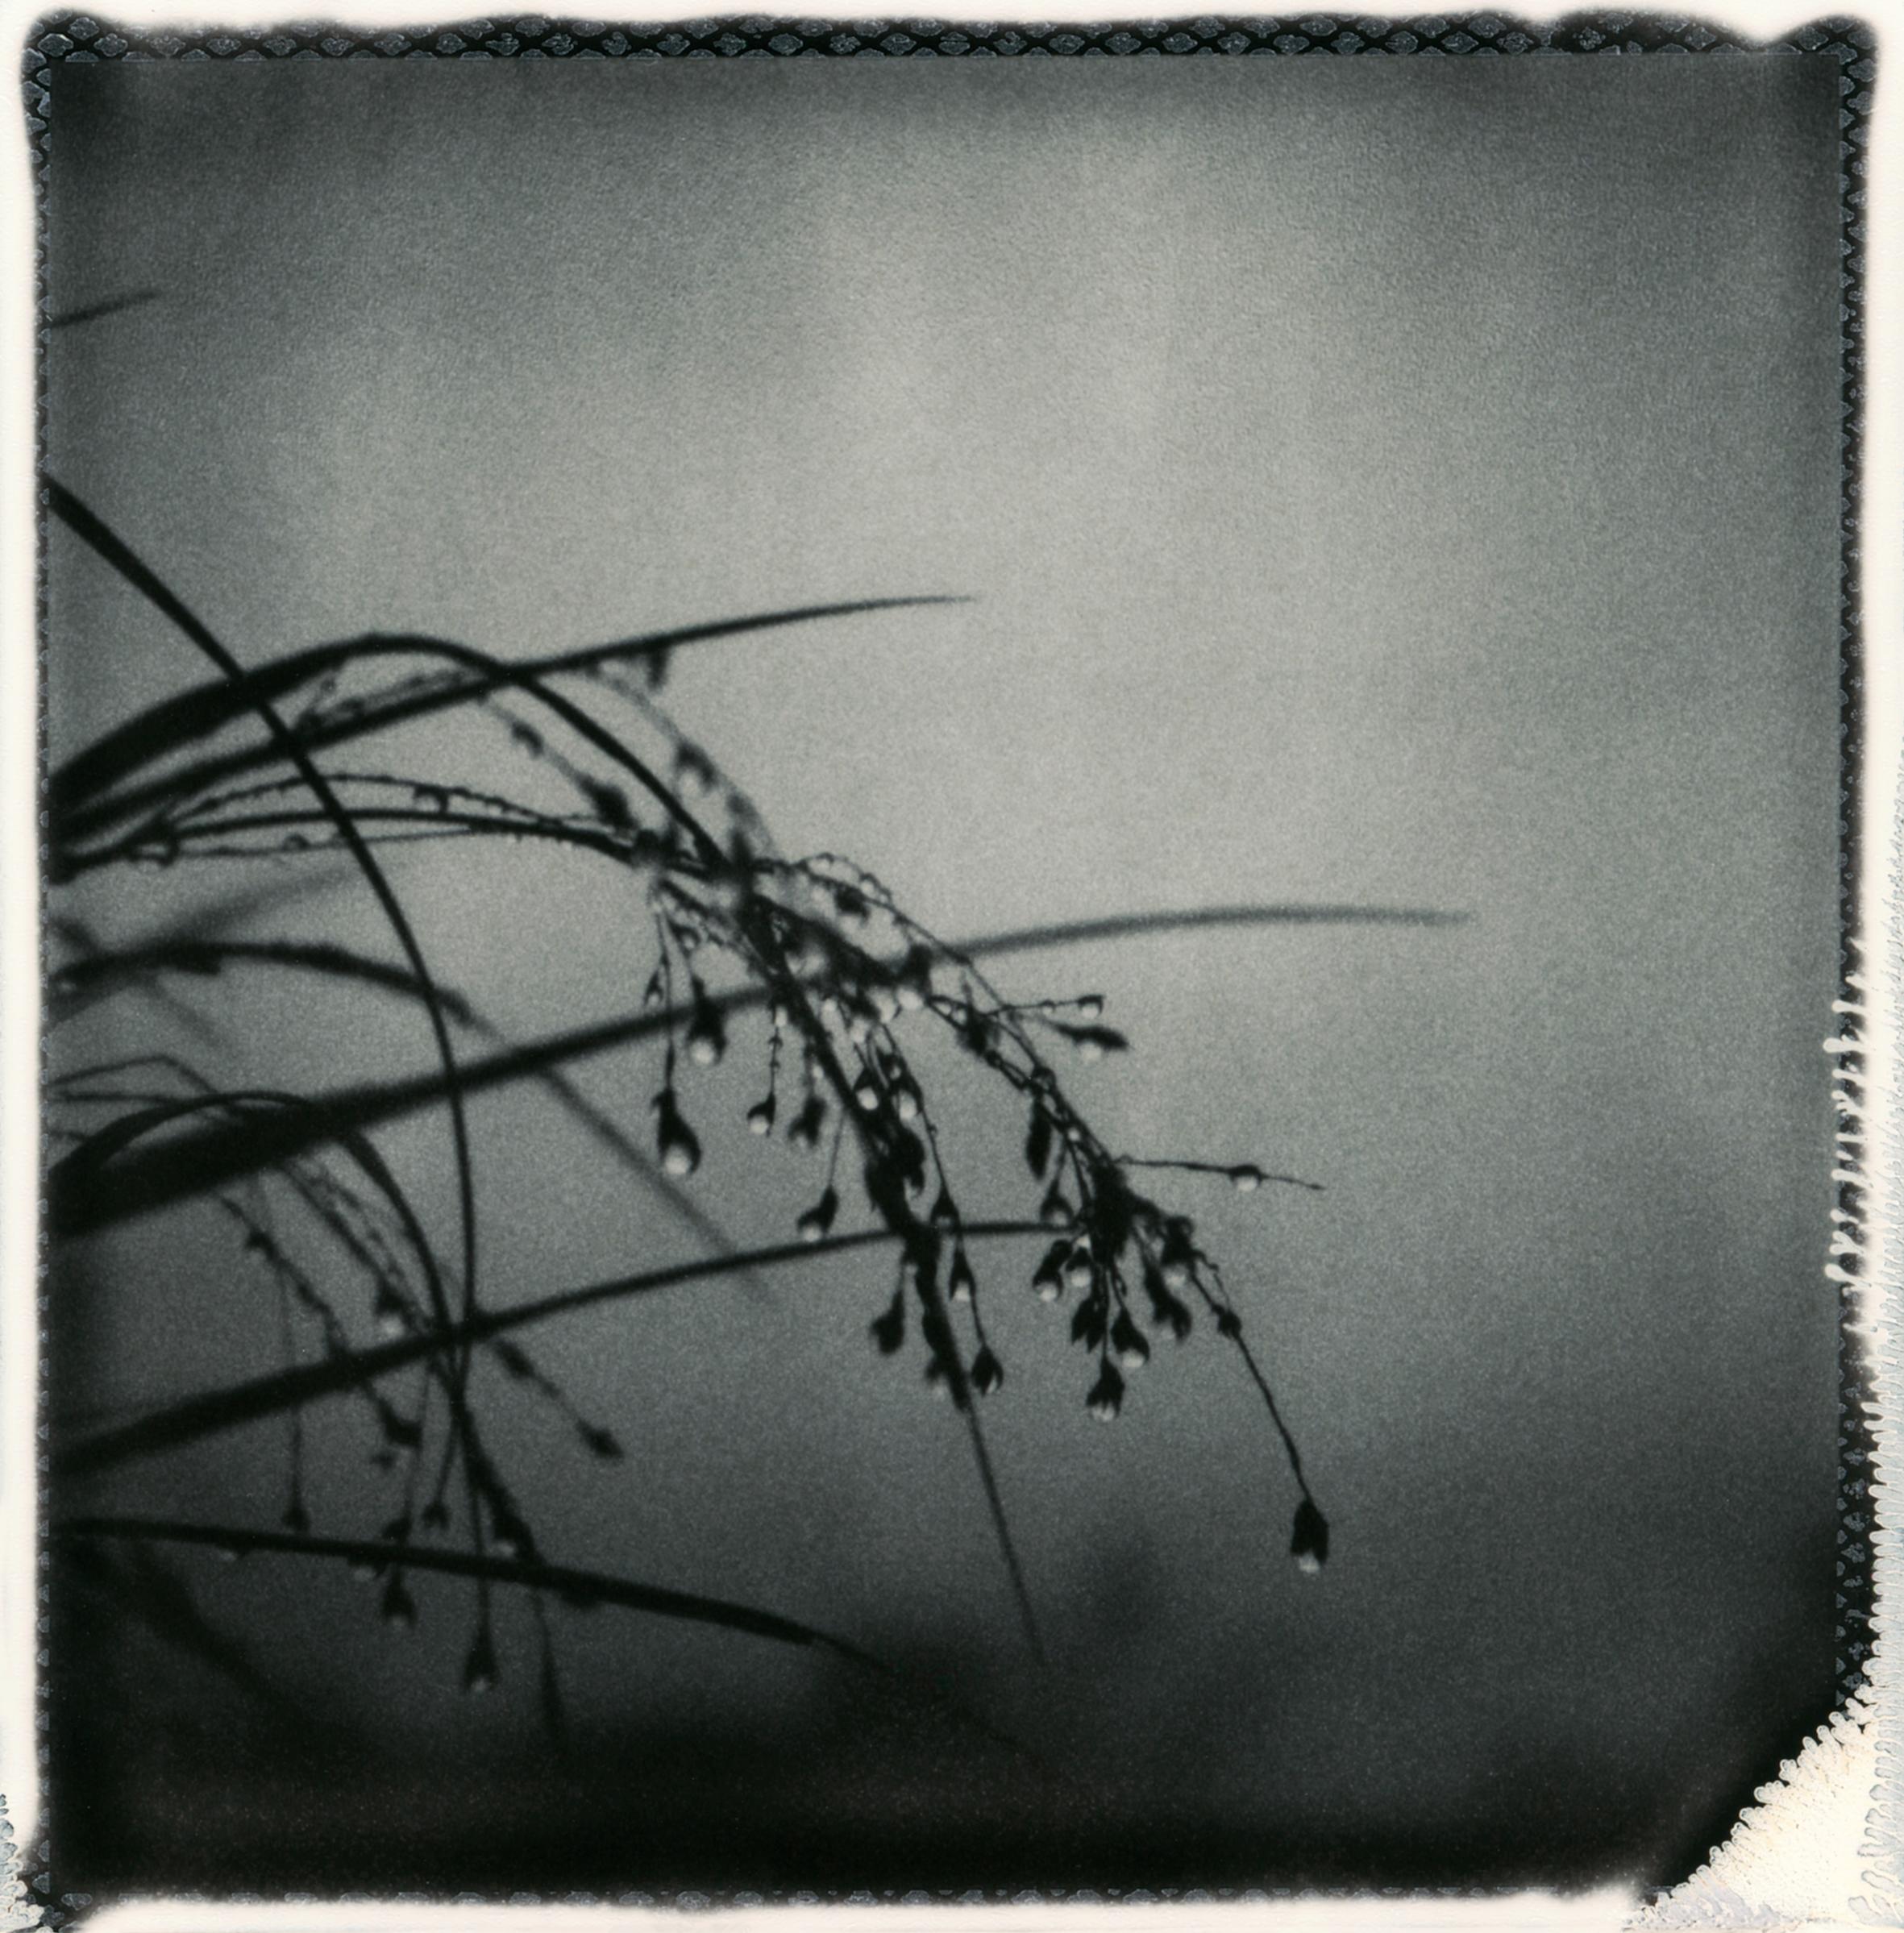 Ugne Pouwell Still-Life Photograph - October rain - Polaroid black and white floral photography, Limited edition 20